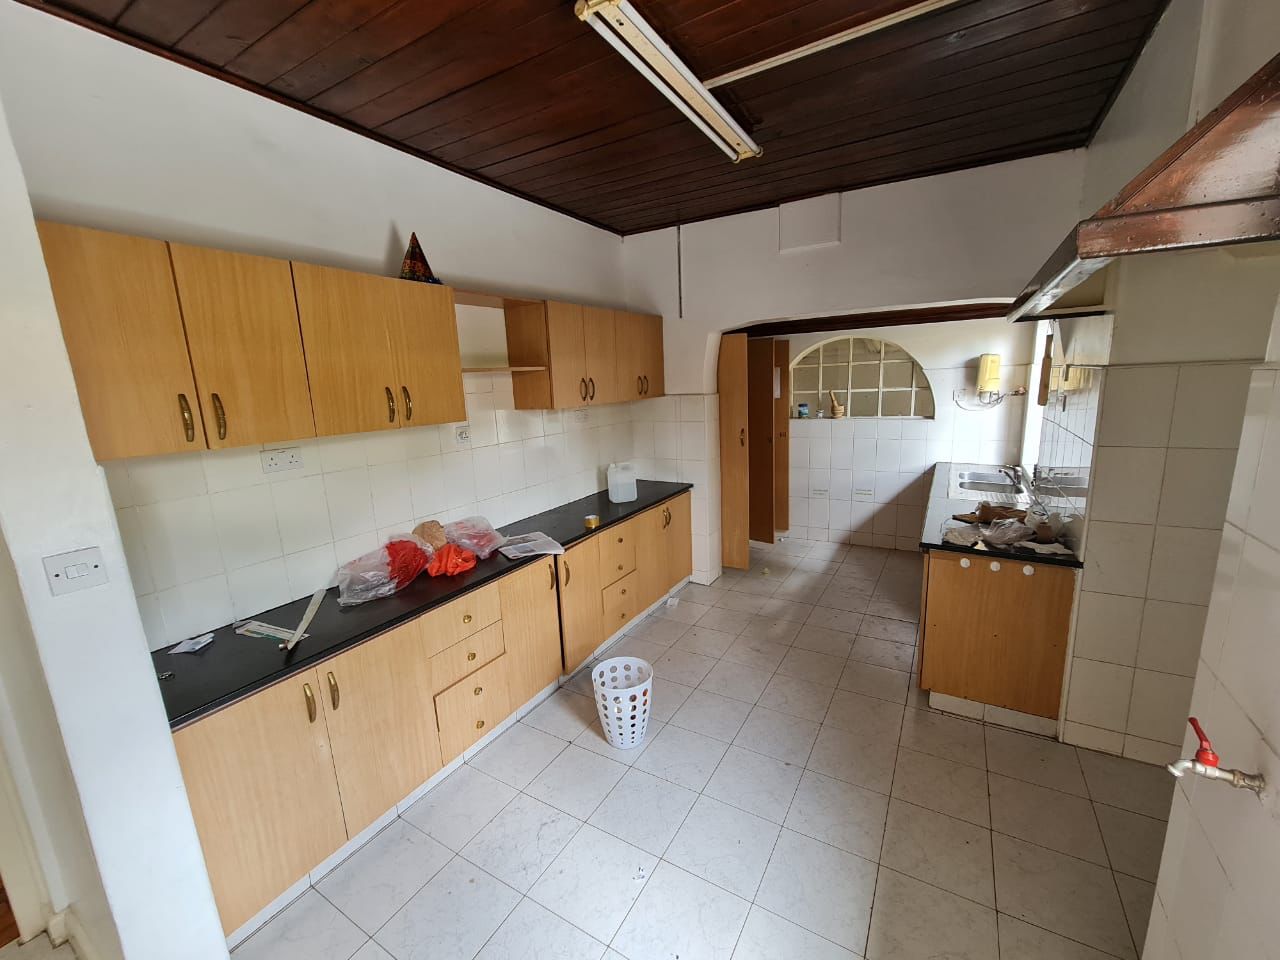 4 bedroom bungalow, plus 2 dsqs, ensuite, garden, well secured. Ideal for office. 250k3